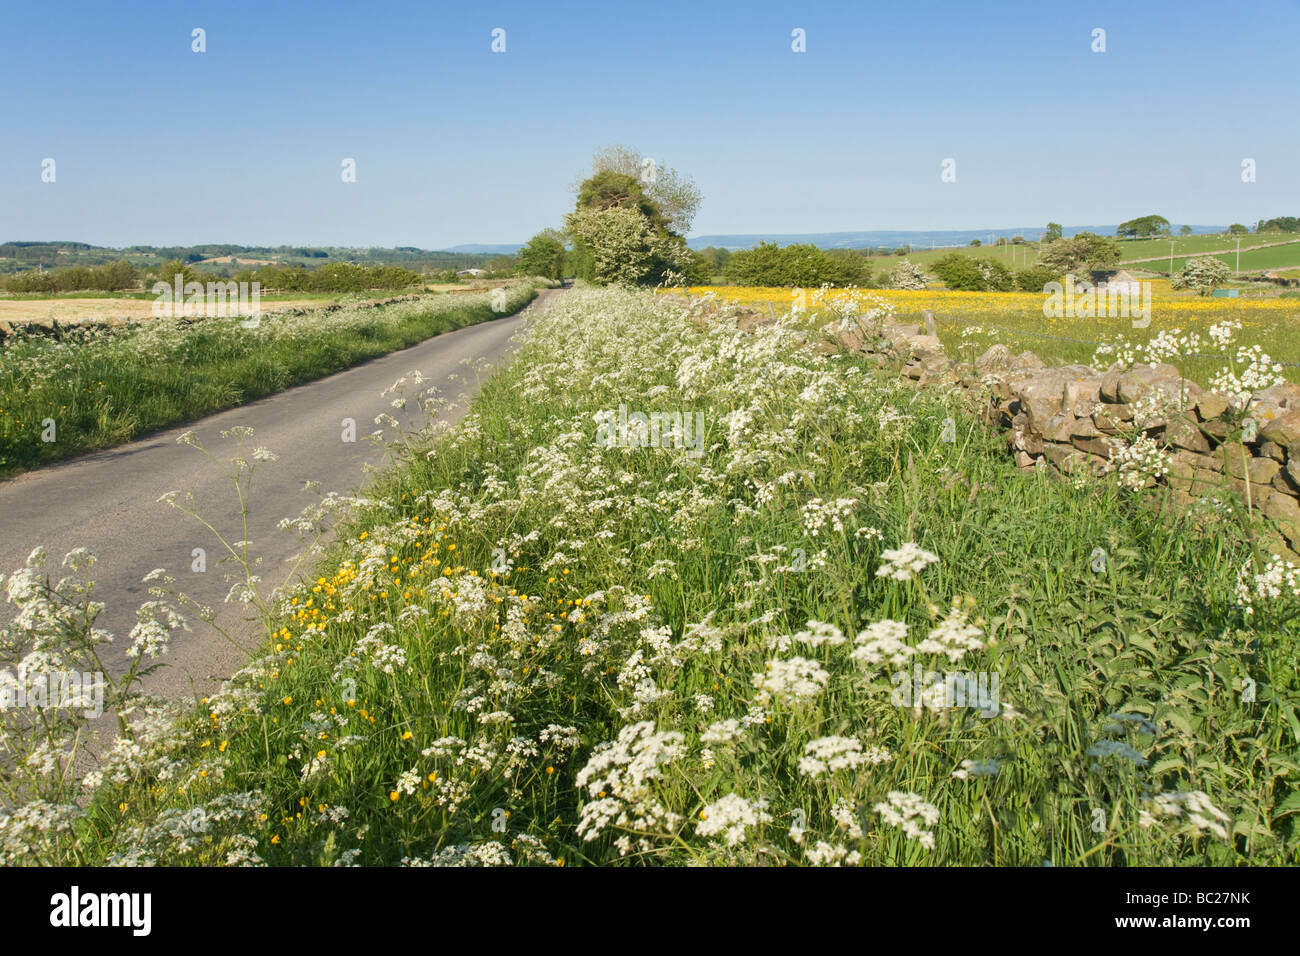 Country road near Leyburn, North Yorkshire.  grass verge with cow parsley in flower and a field covered in dandelions. Stock Photo